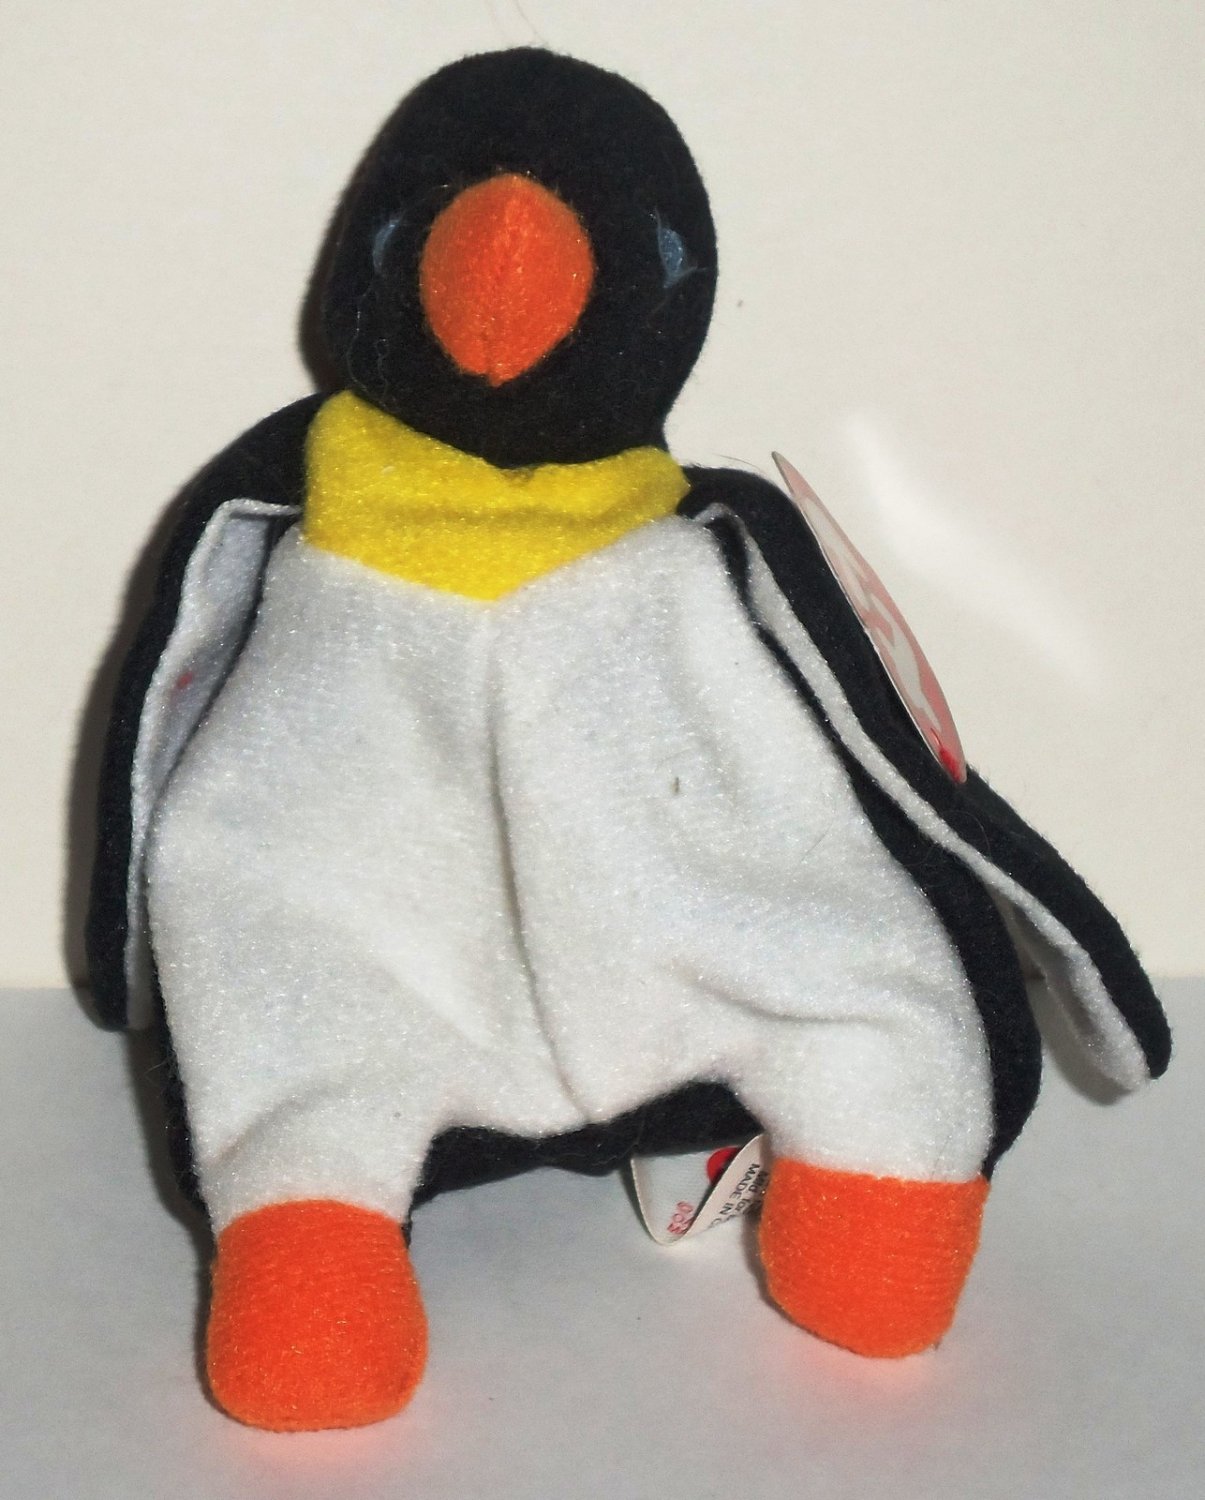 Waddle The Penguin TY McDonald's toy Teenie Beanie Baby #11 1998 